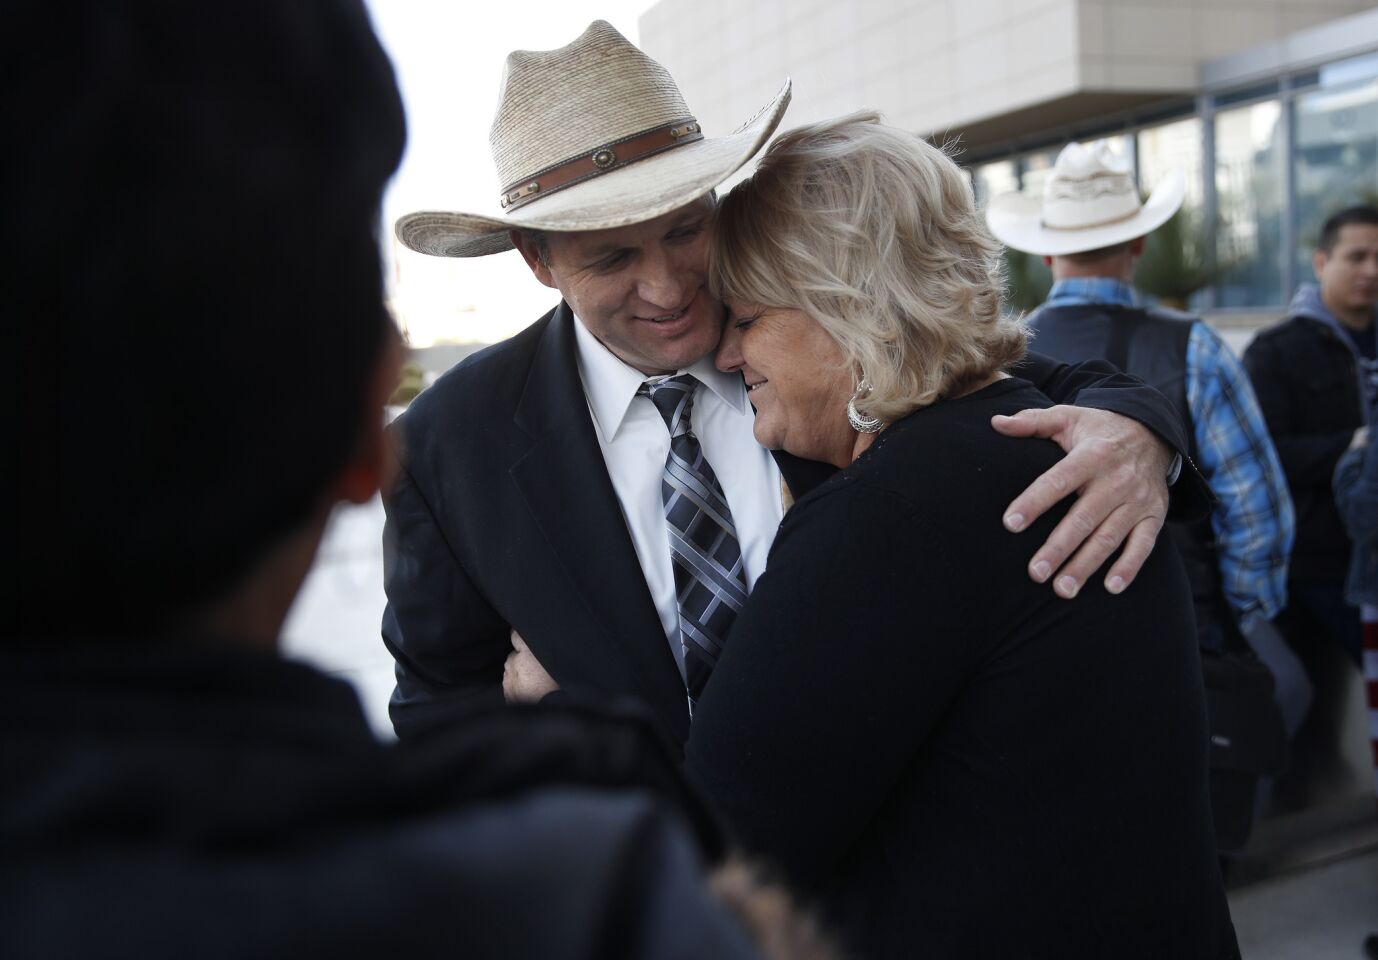 Ammon Bundy, left, hugs is aunt Lillie Spencer outside of a federal courthouse in Las Vegas after U.S. District Judge Gloria Navarro declared a mistrial in the case against Cliven Bundy, his sons Ryan and Ammon Bundy.